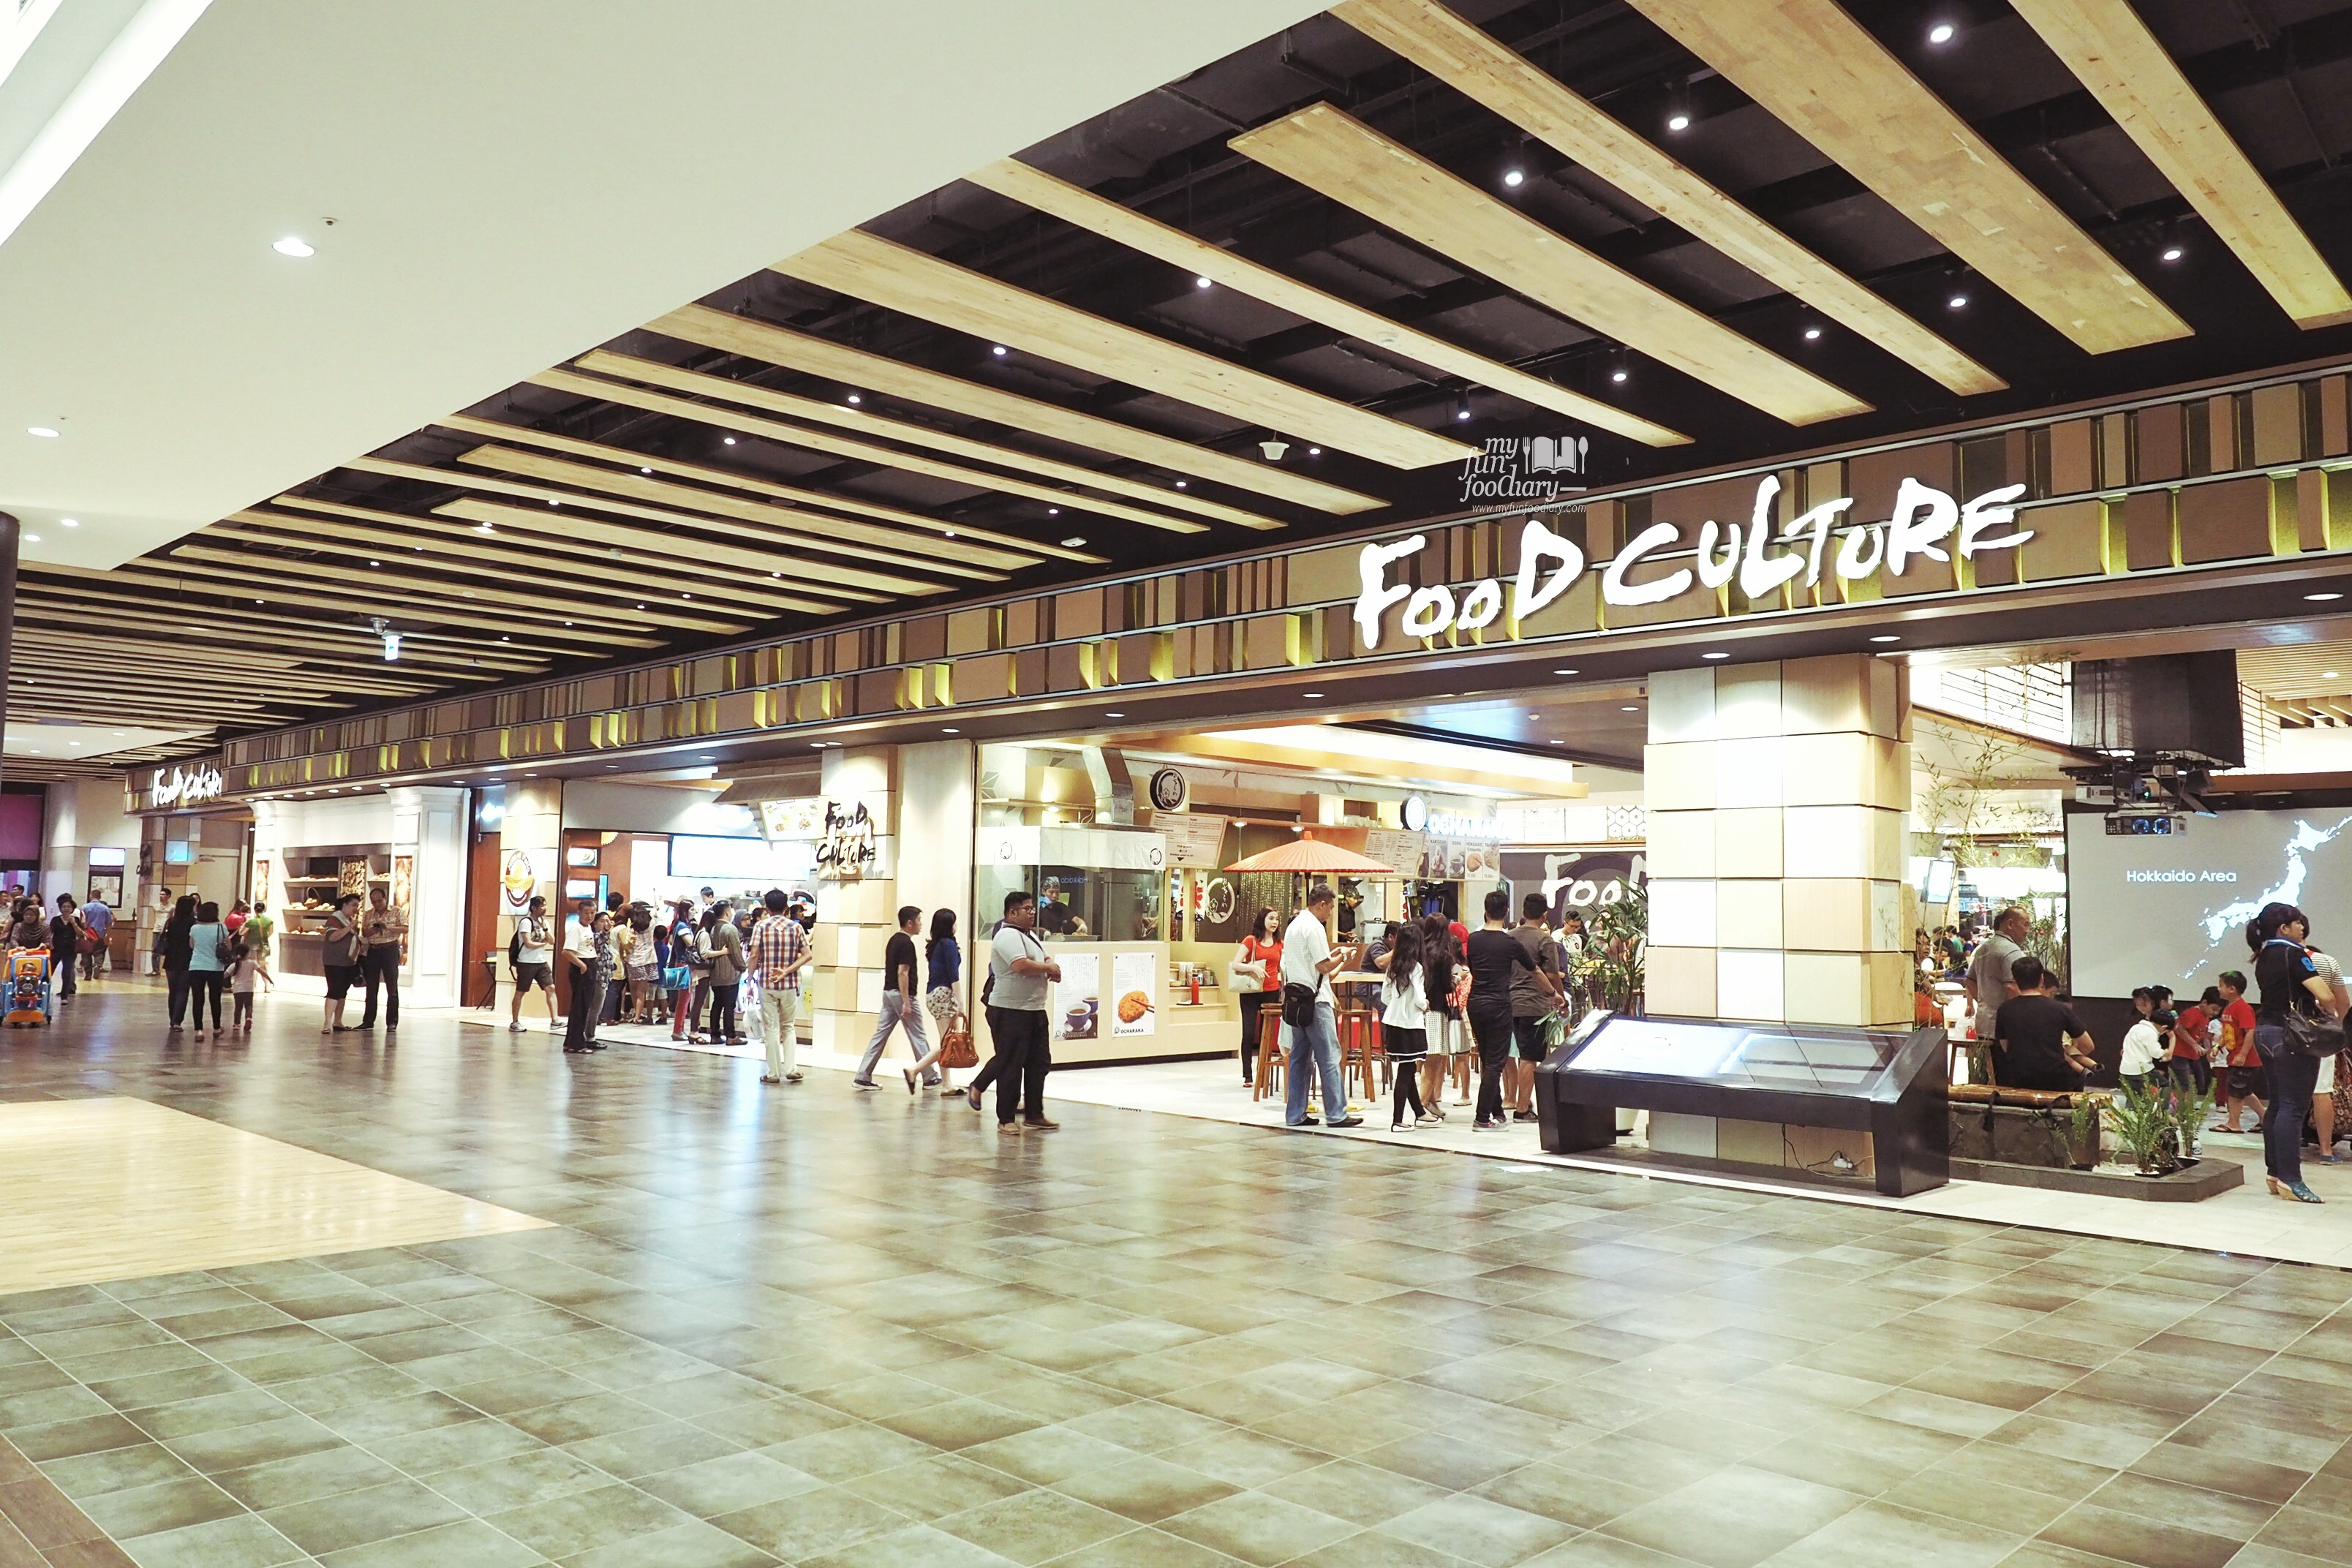 The Food Culture at AEON Mall by Myfunfoodiary